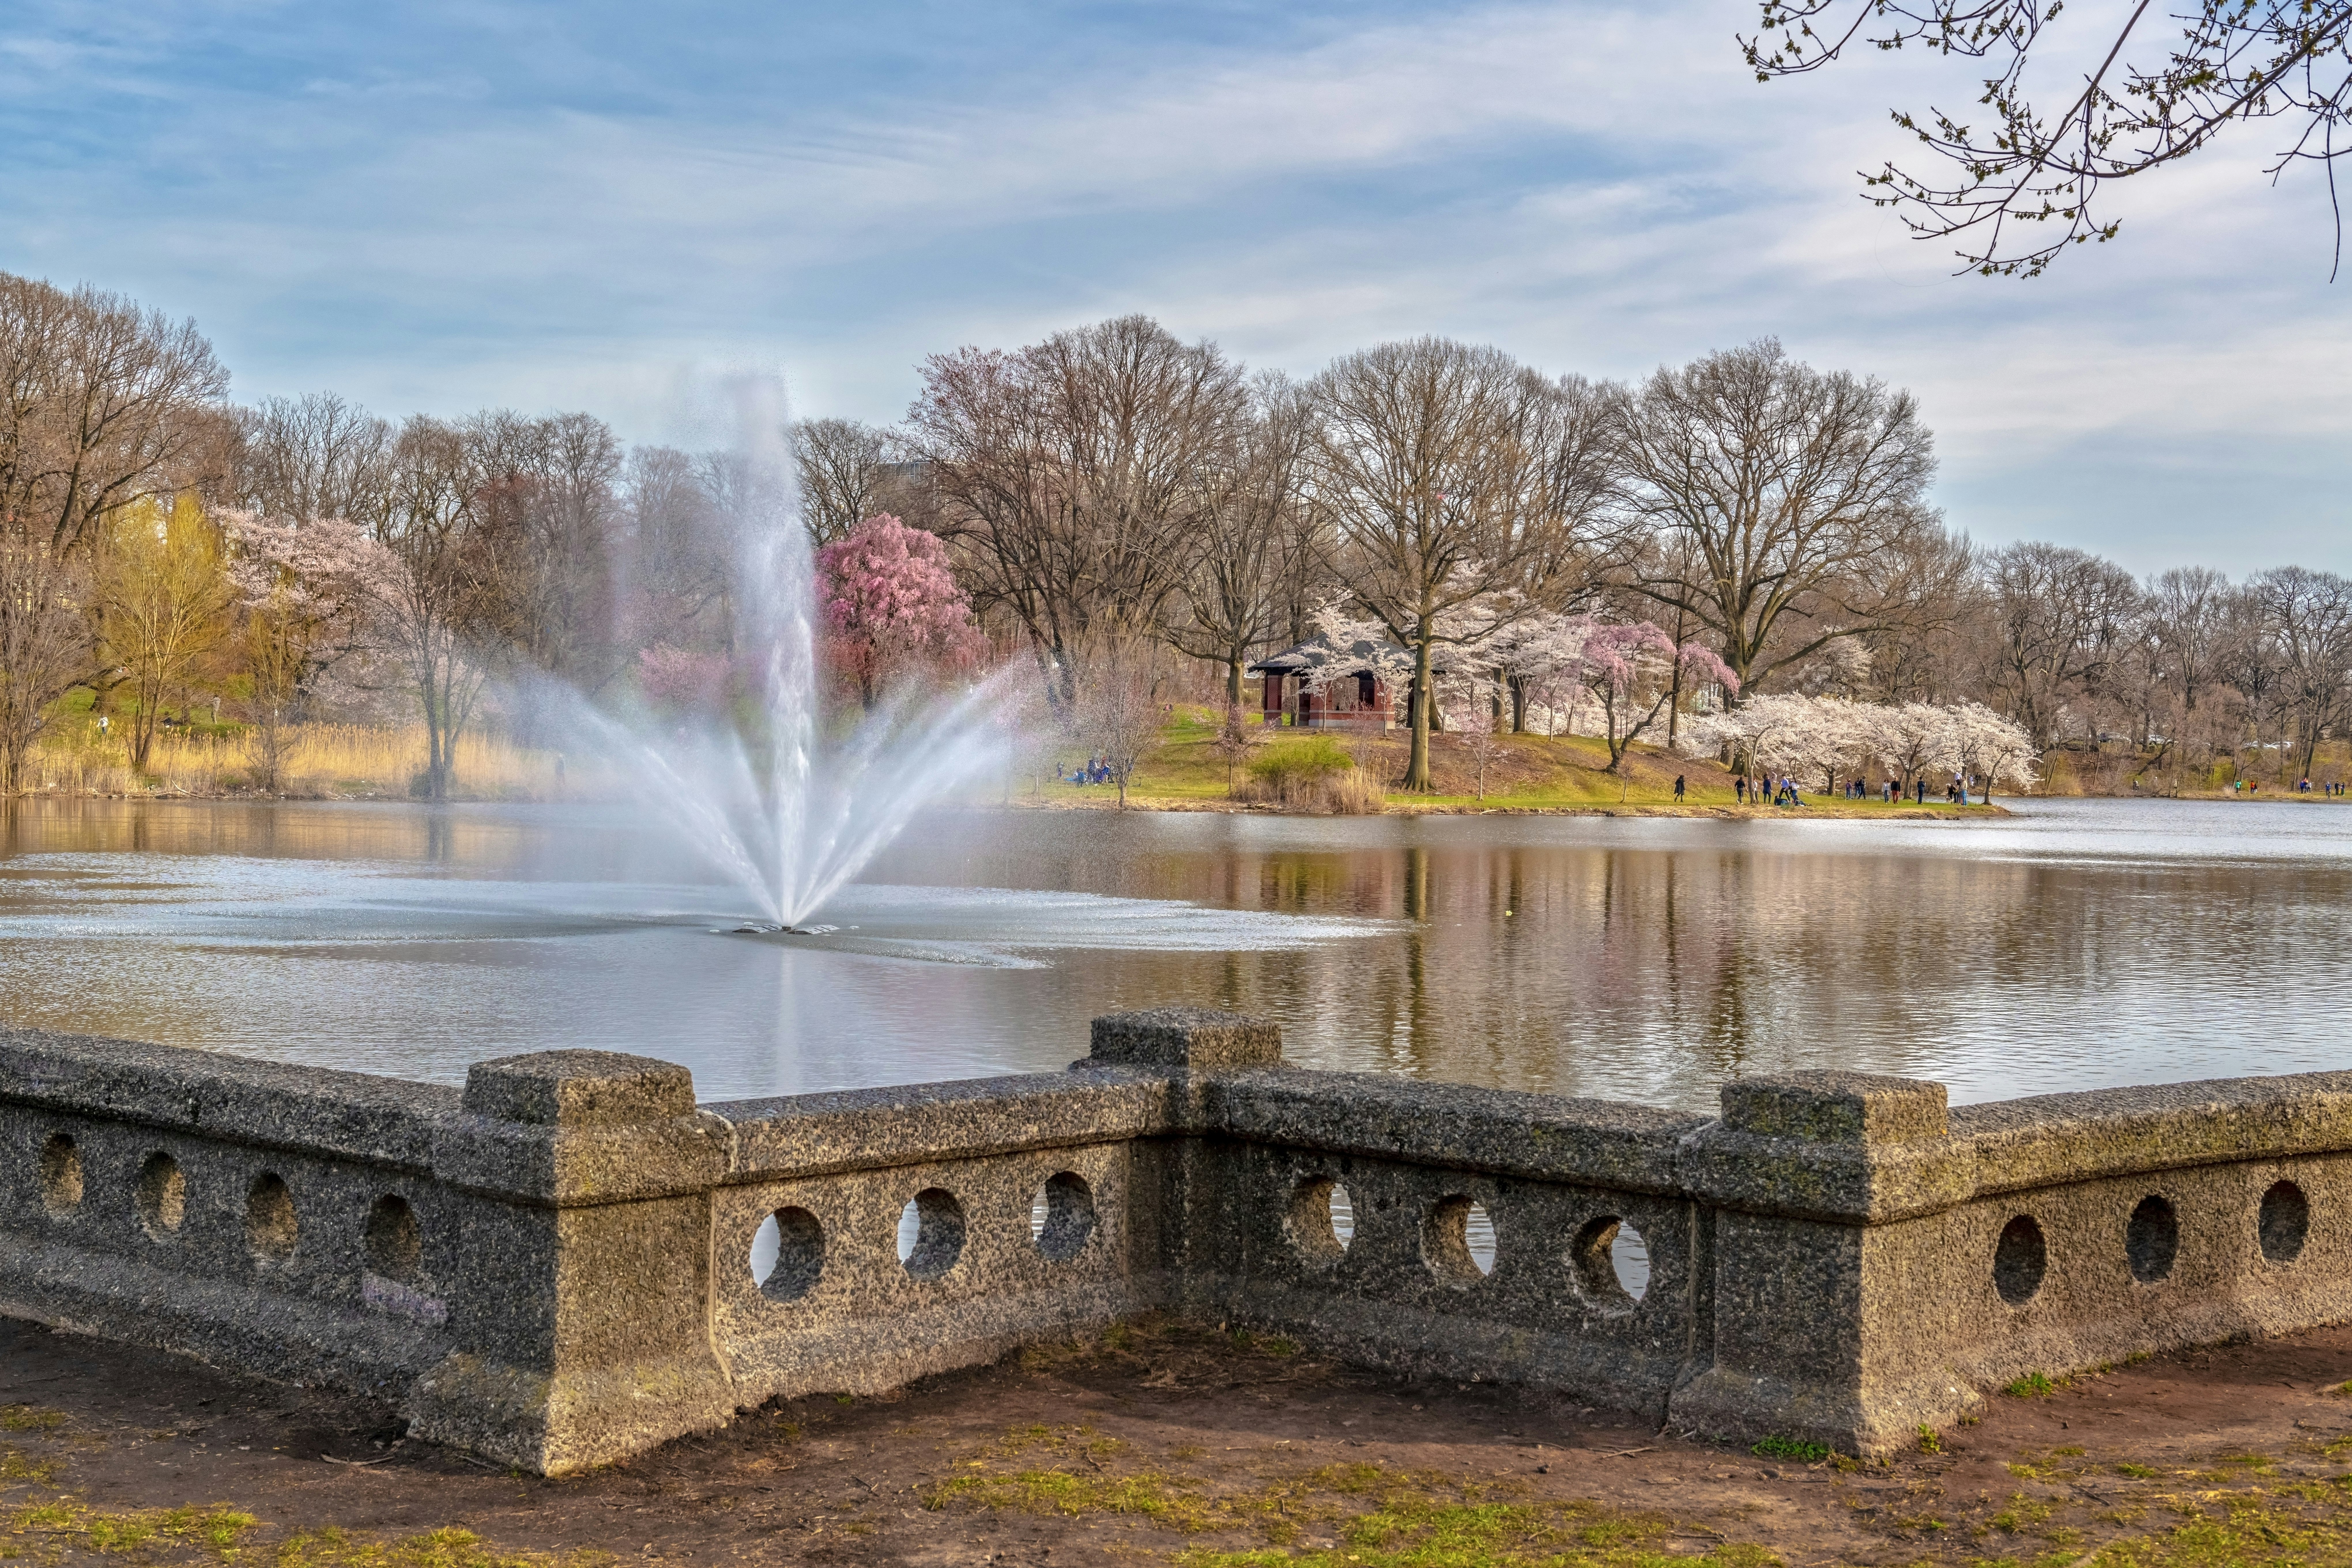 A fountain sprays water in a small pond. There is a stone boarder in the front of the photo and blooming Cherry Blossoms in the background. 